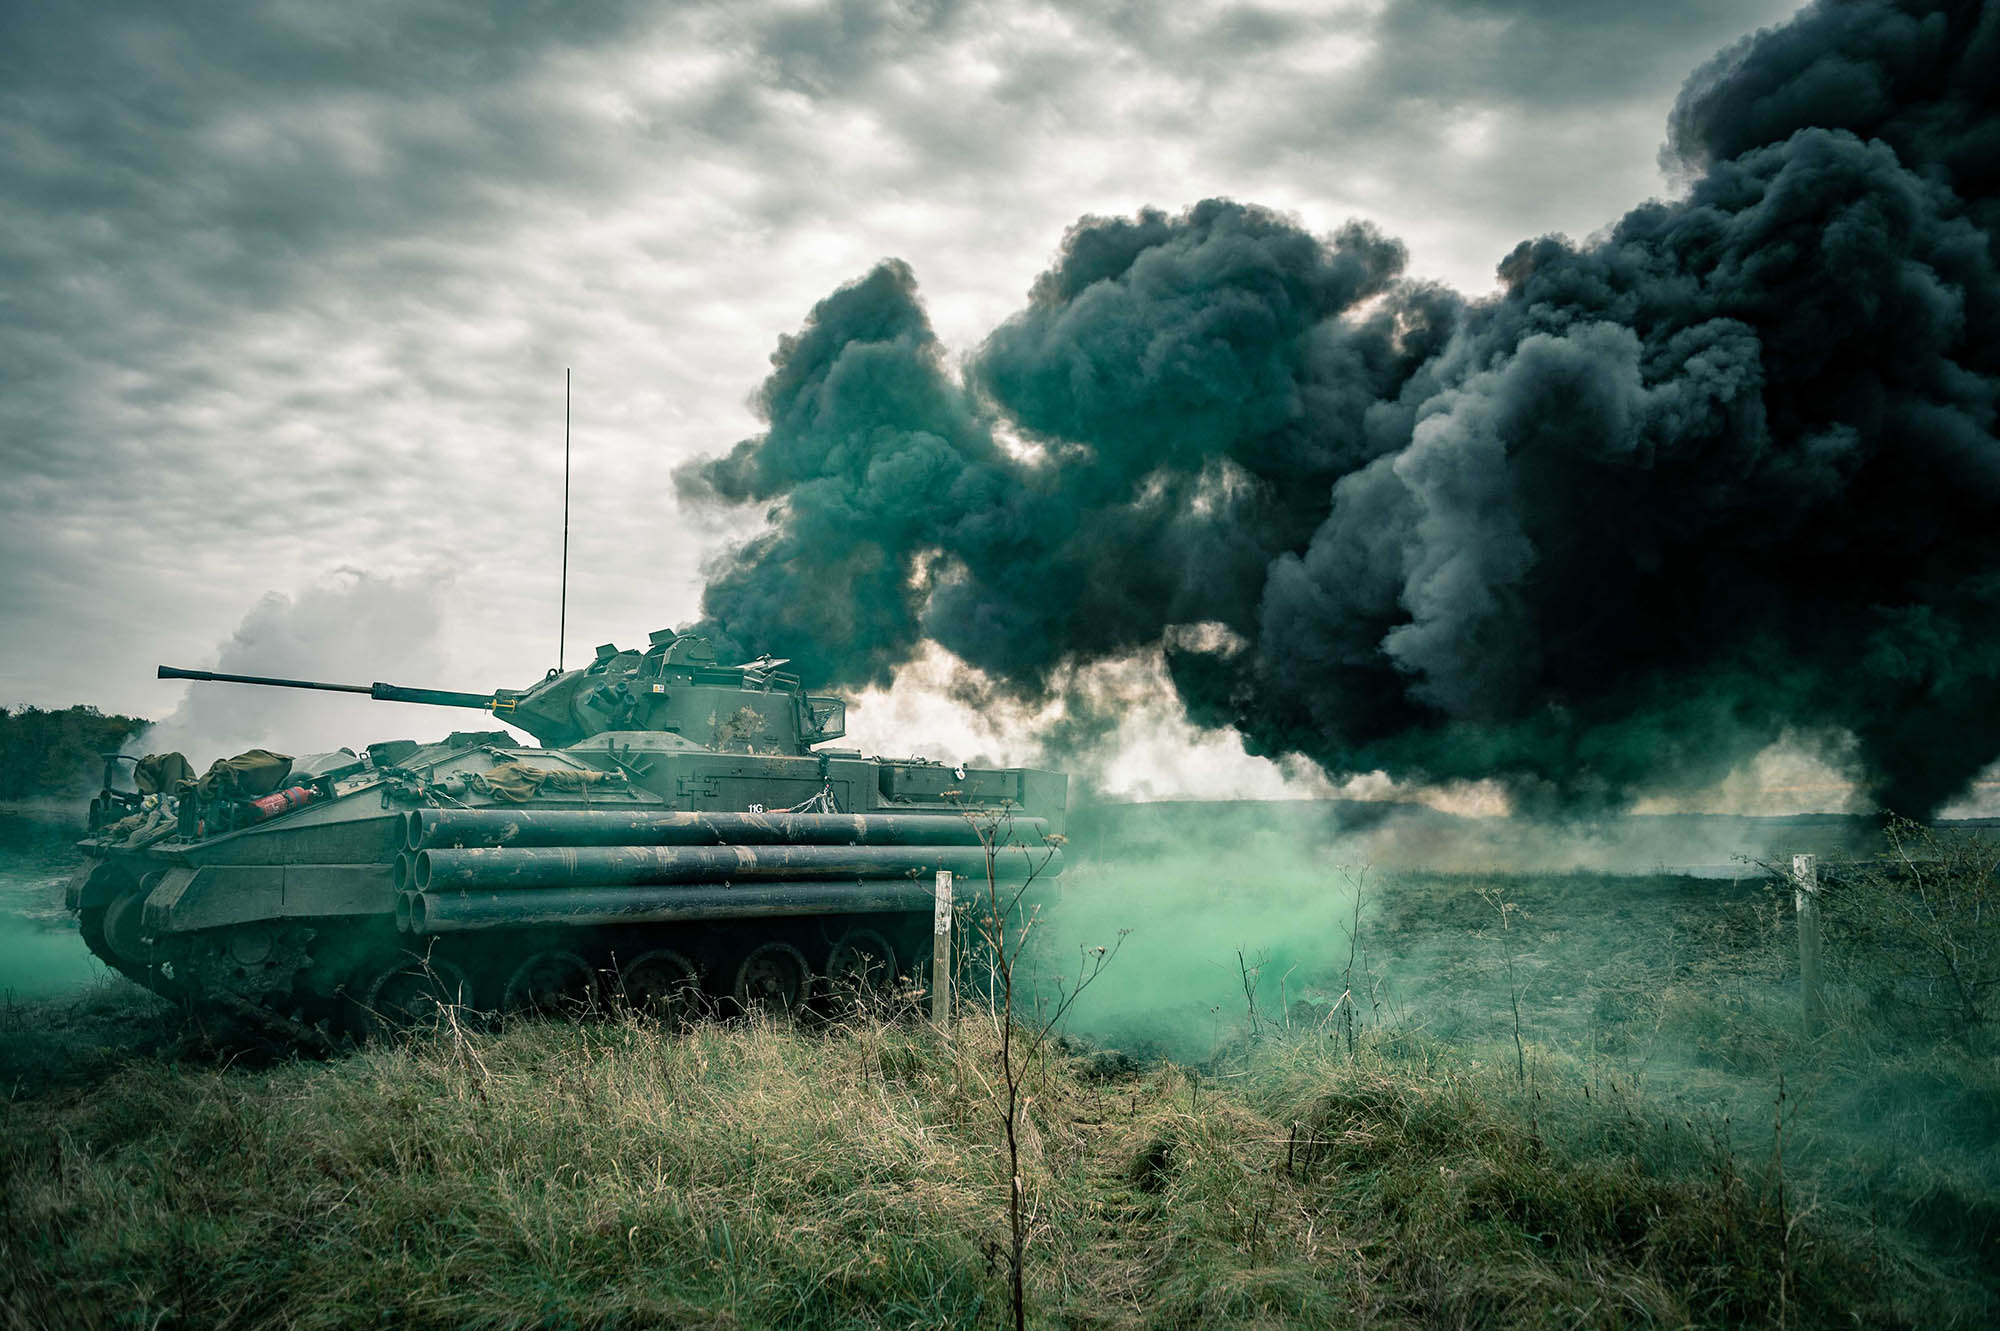 A tank in a field with black trail of smoke in the sky behind it